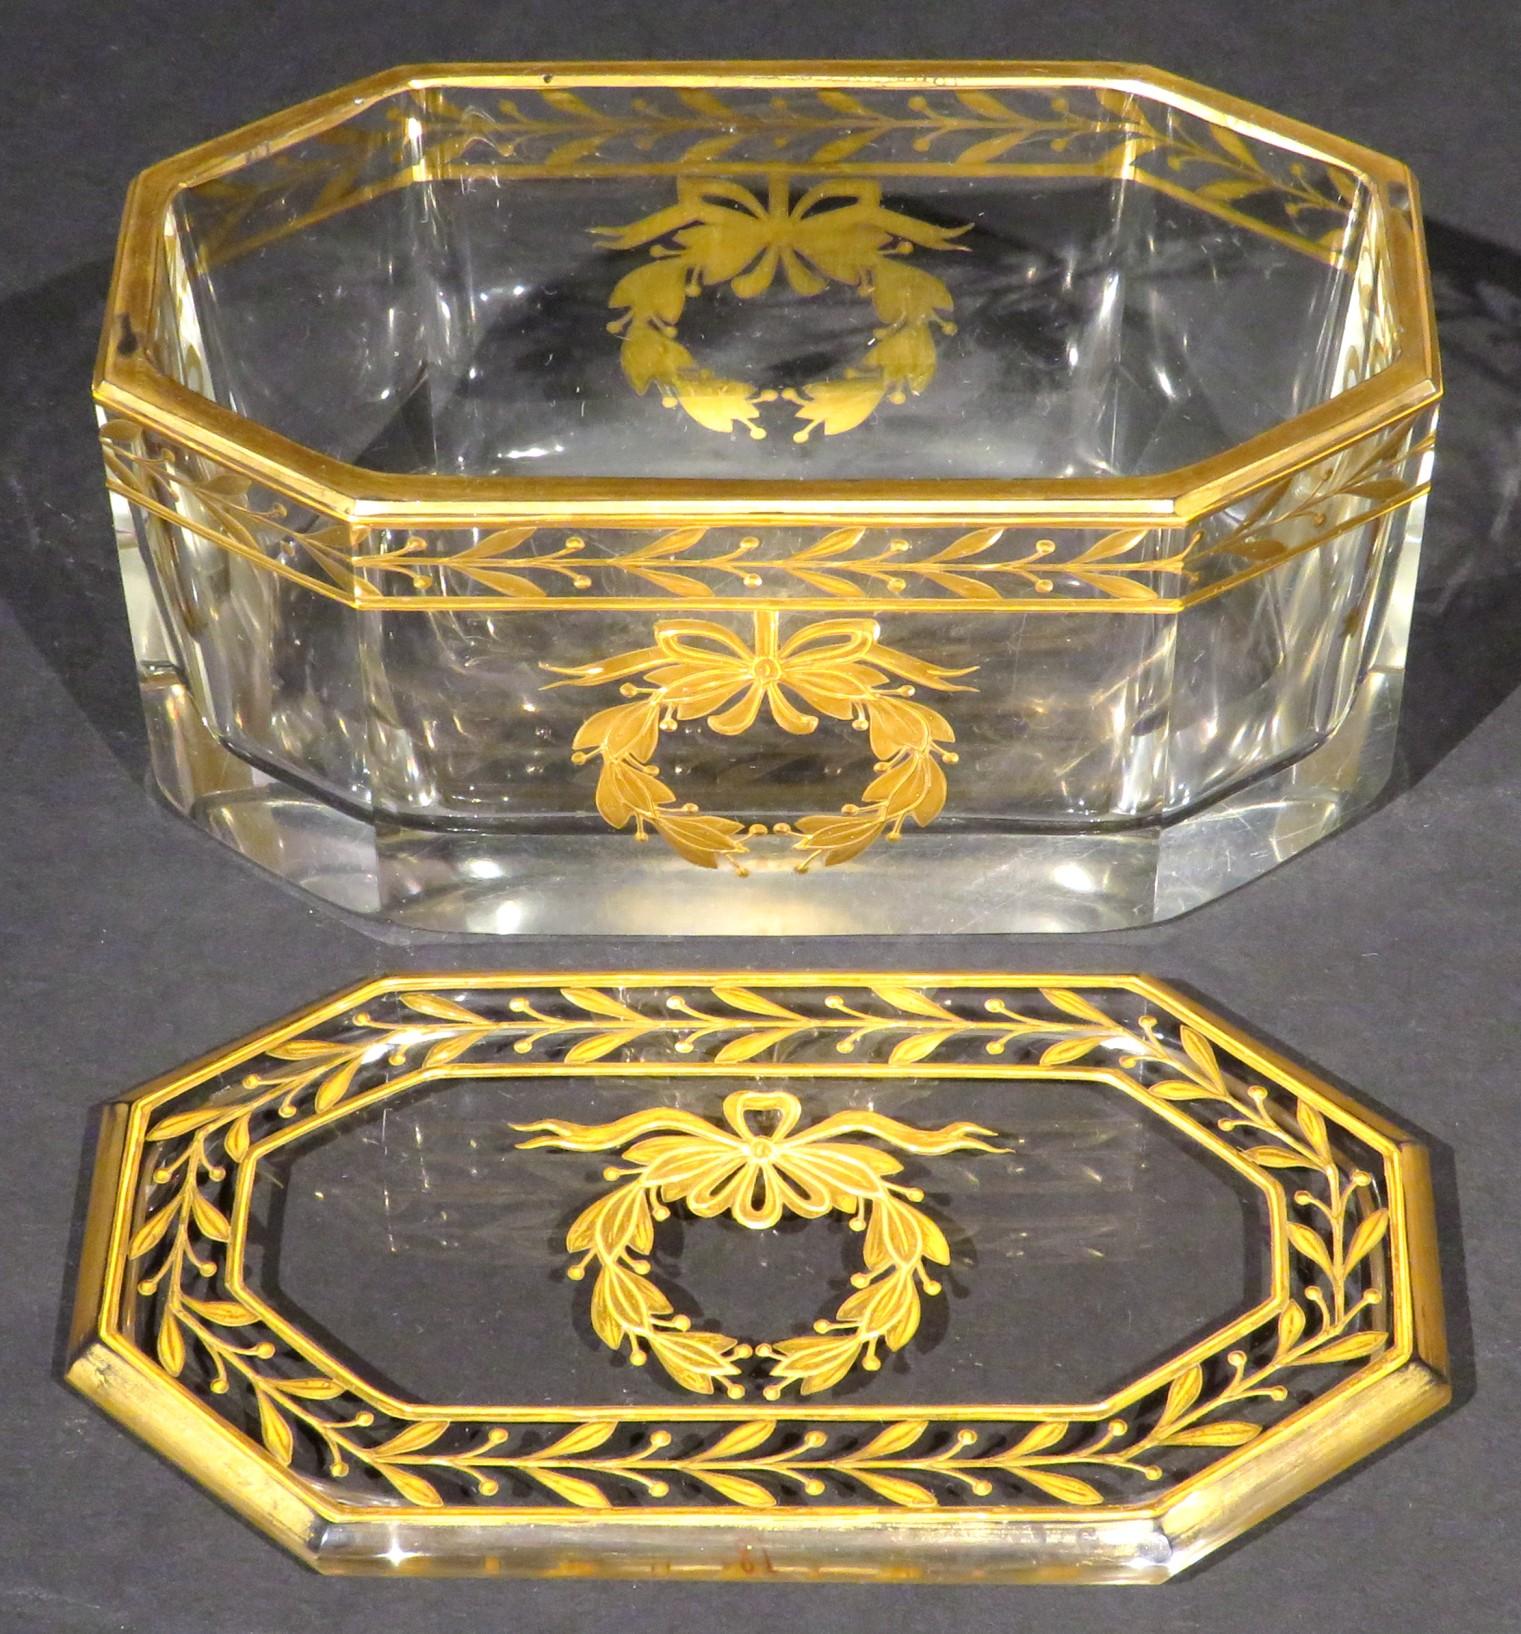 Large Early 20th Century Gilt Decorated Glass Dresser Jar or Box, Circa 1920 For Sale 1